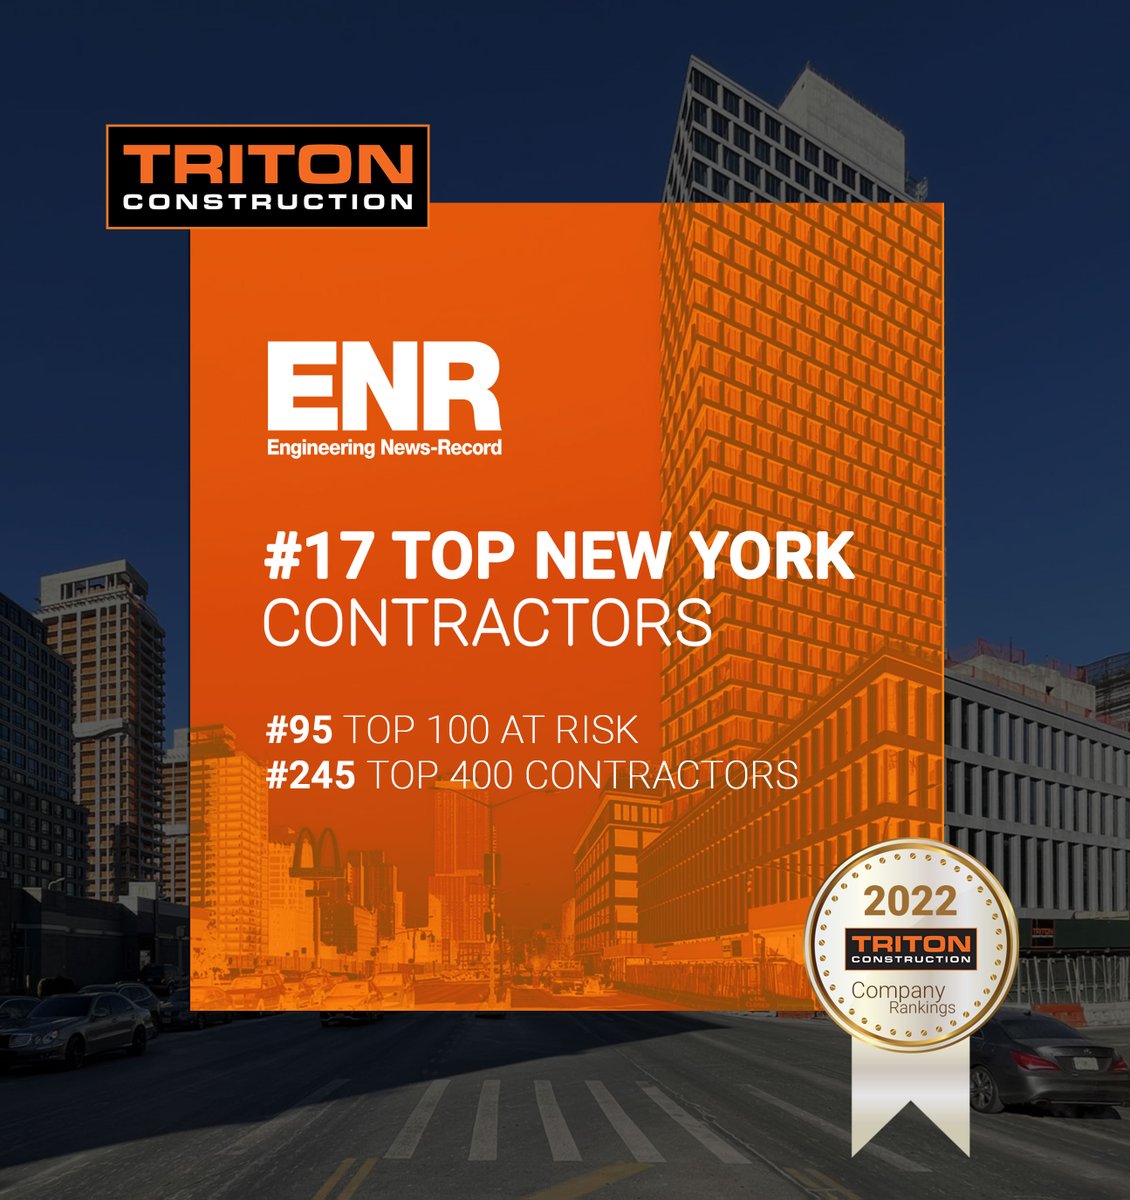 Triton Construction is proud to be listed as #17 in ENR’s 2022 Top NY Contractors! Thank you to our fabulous Team!

#Construction #ENR #TritonExcellence